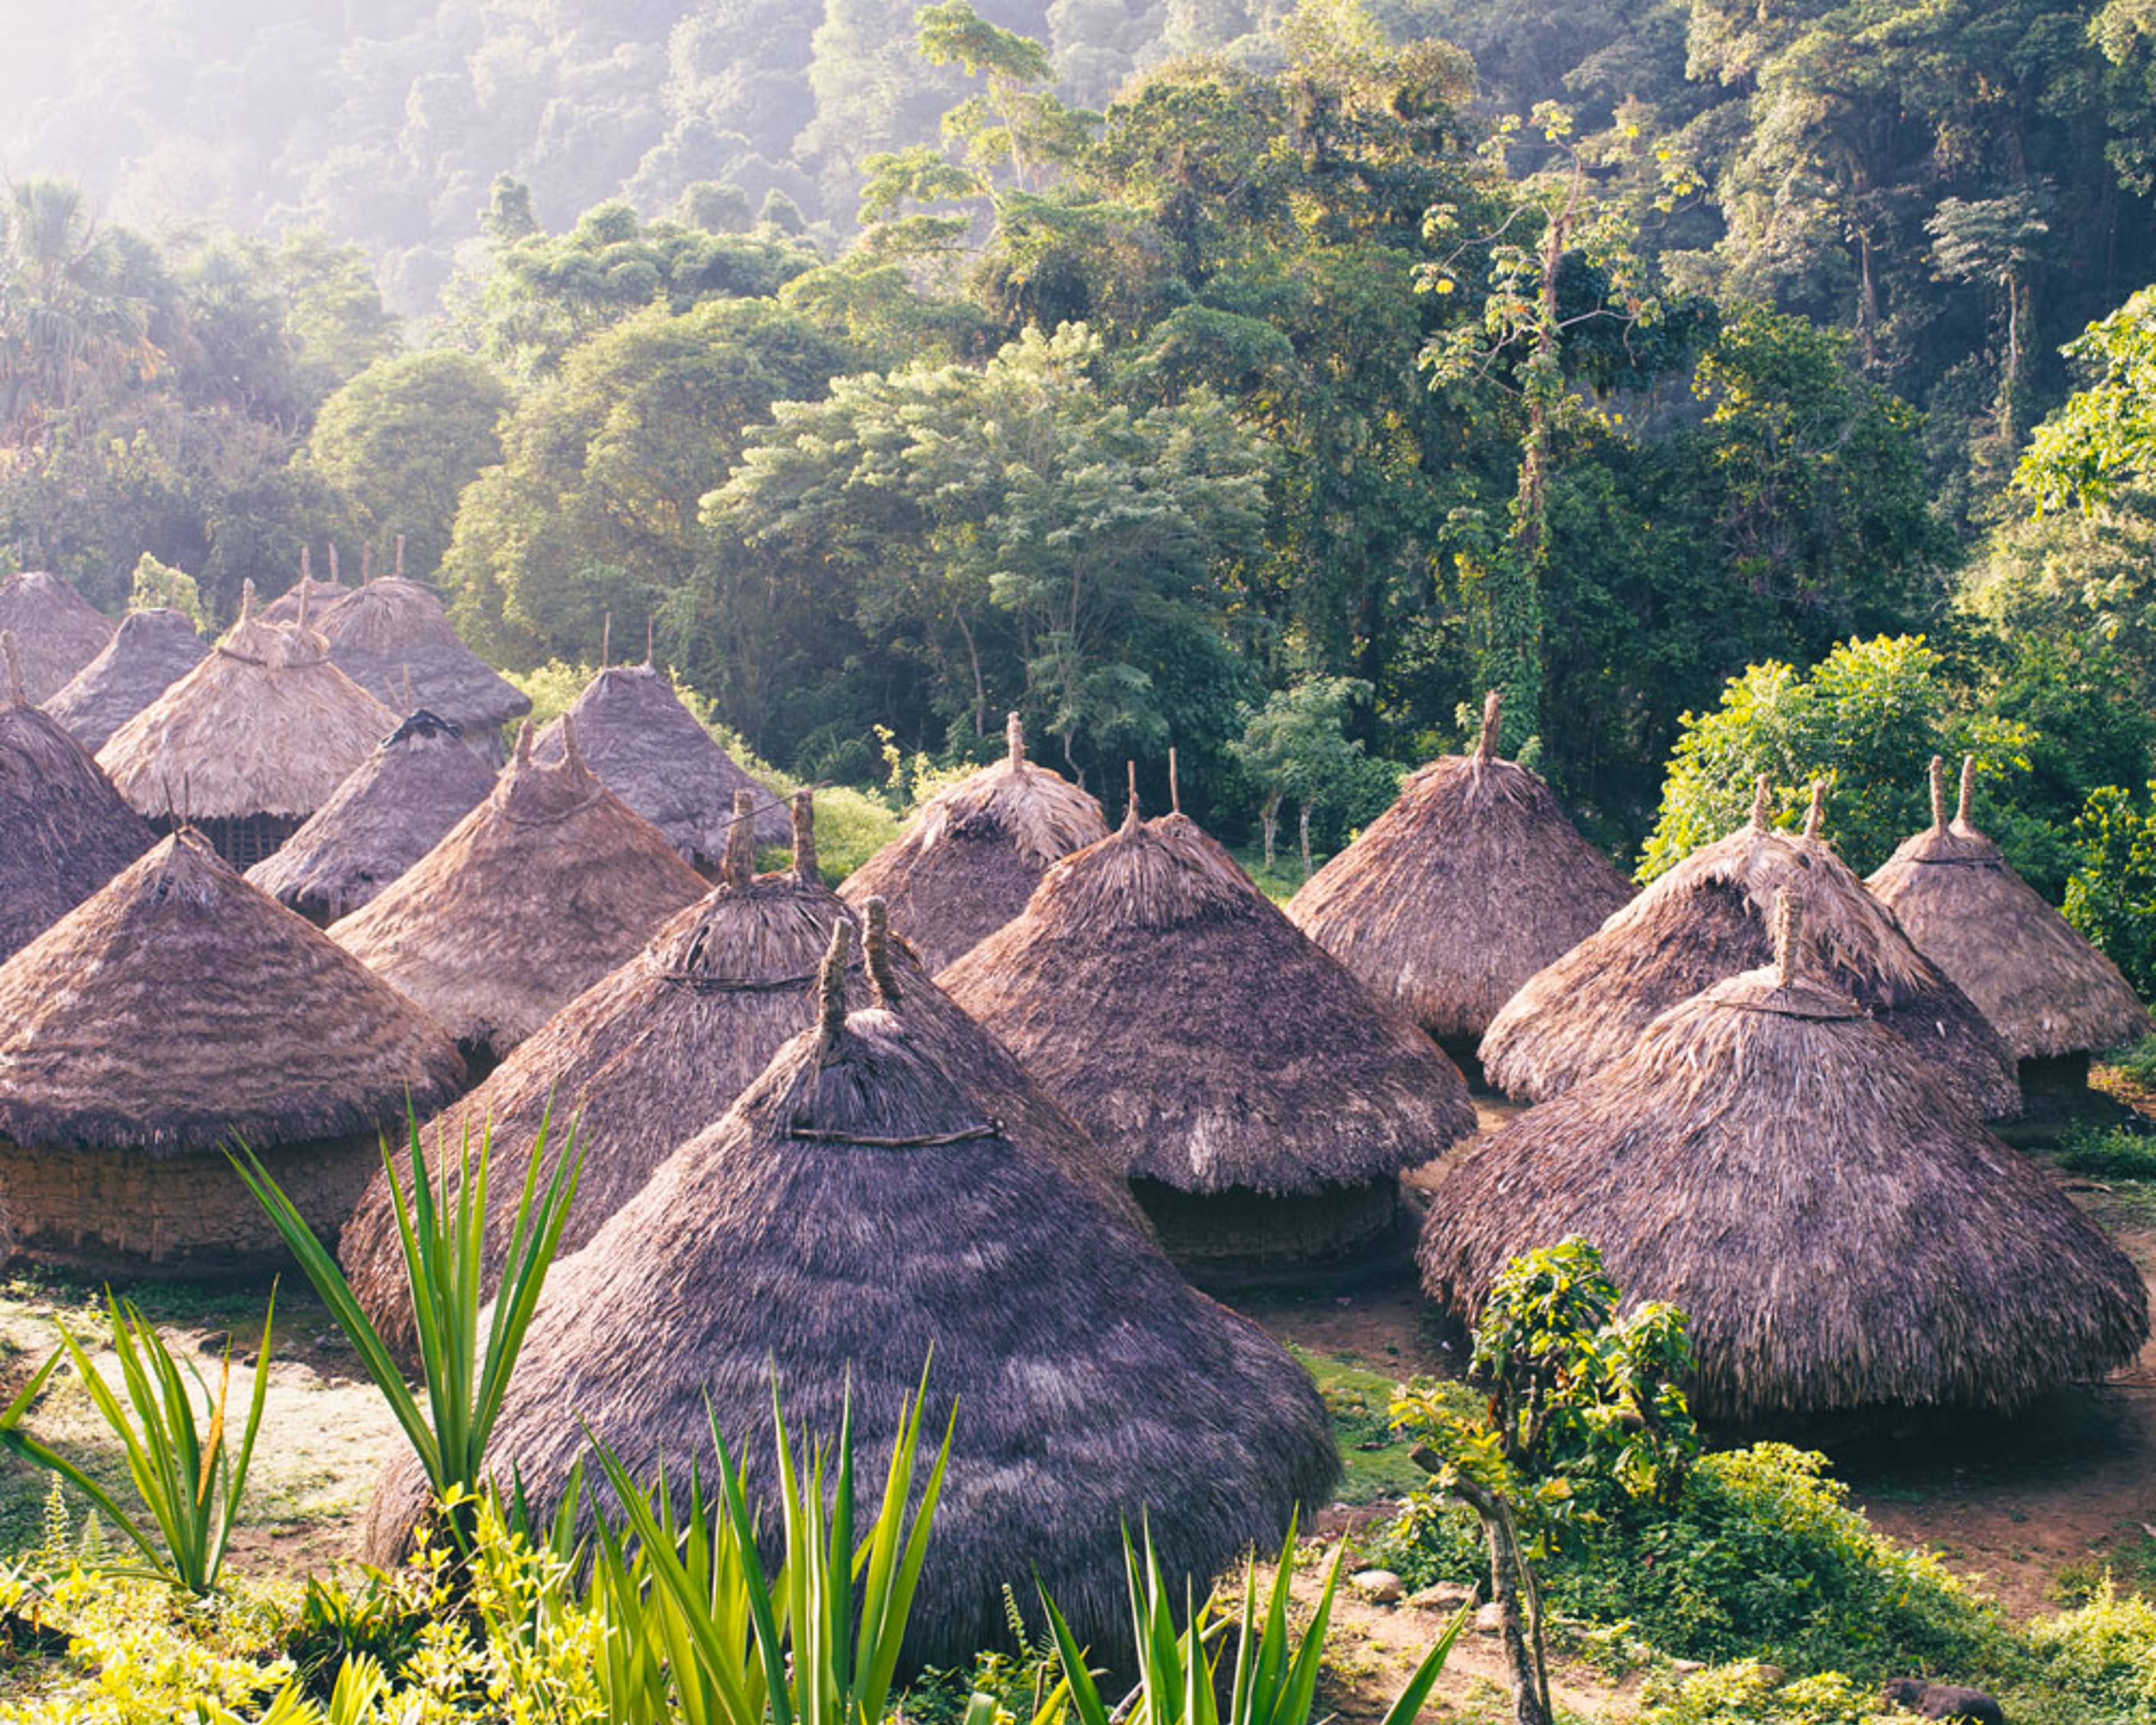 Experience Colombia off-the-beaten-track with a local expert